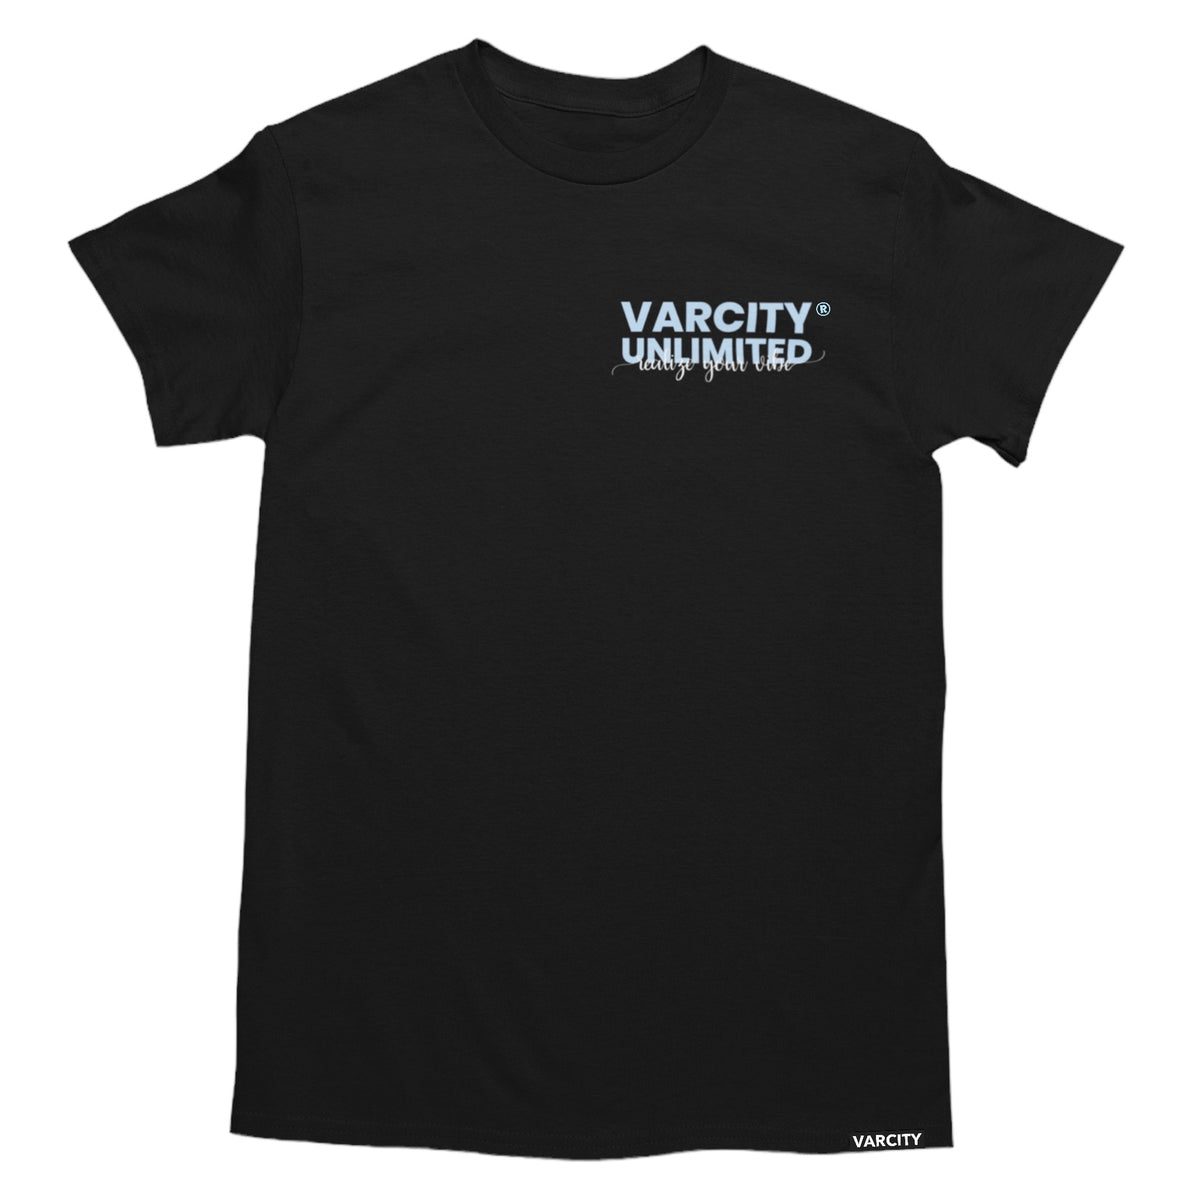 Varcity ® Unlimited Realize Your Vibe T Shirt Black